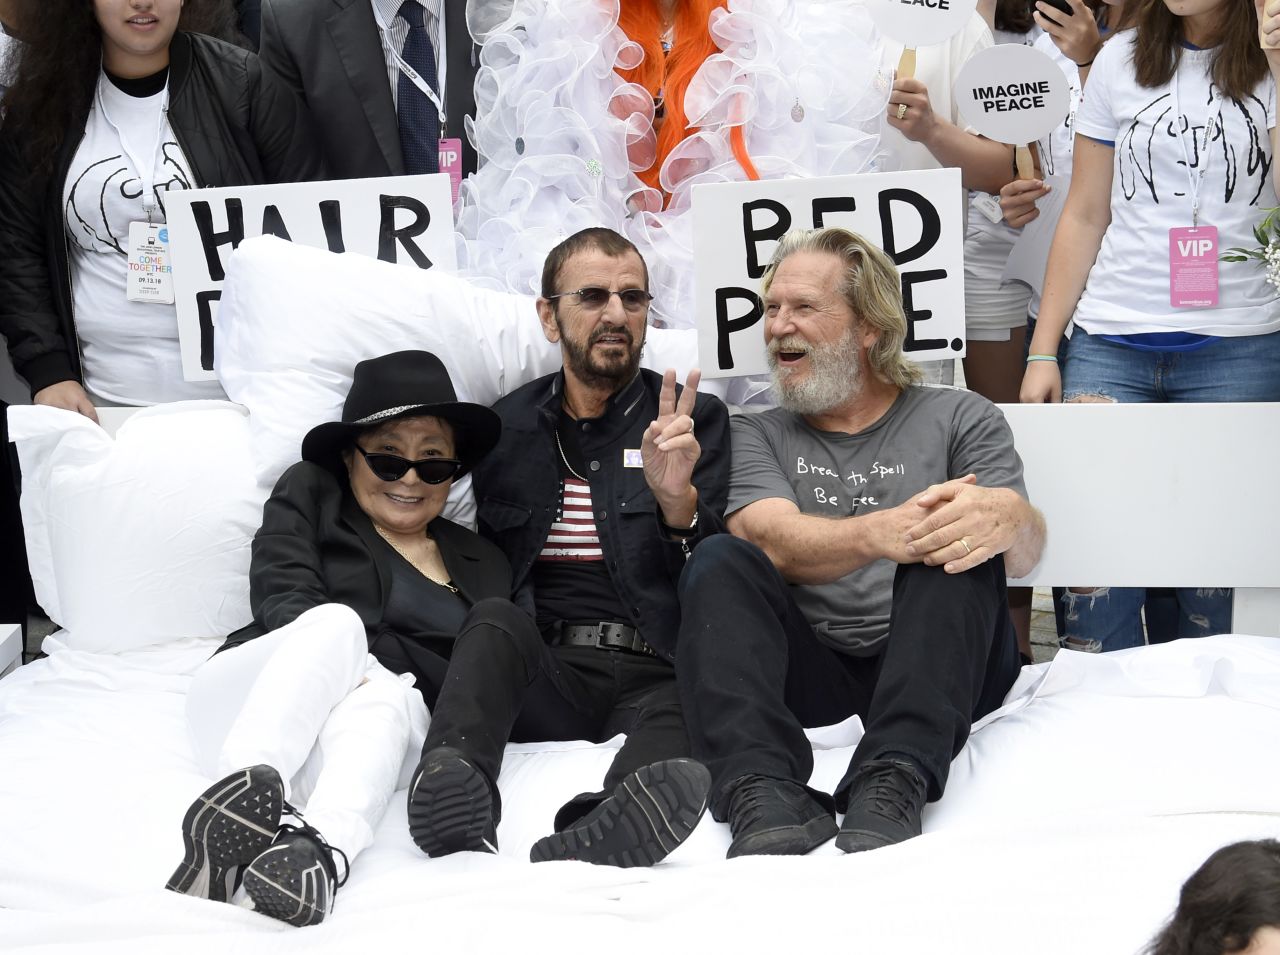 Bridges has a laugh with Yoko Ono and Ringo Starr as they attend the launch of Come Together NYC in 2018.